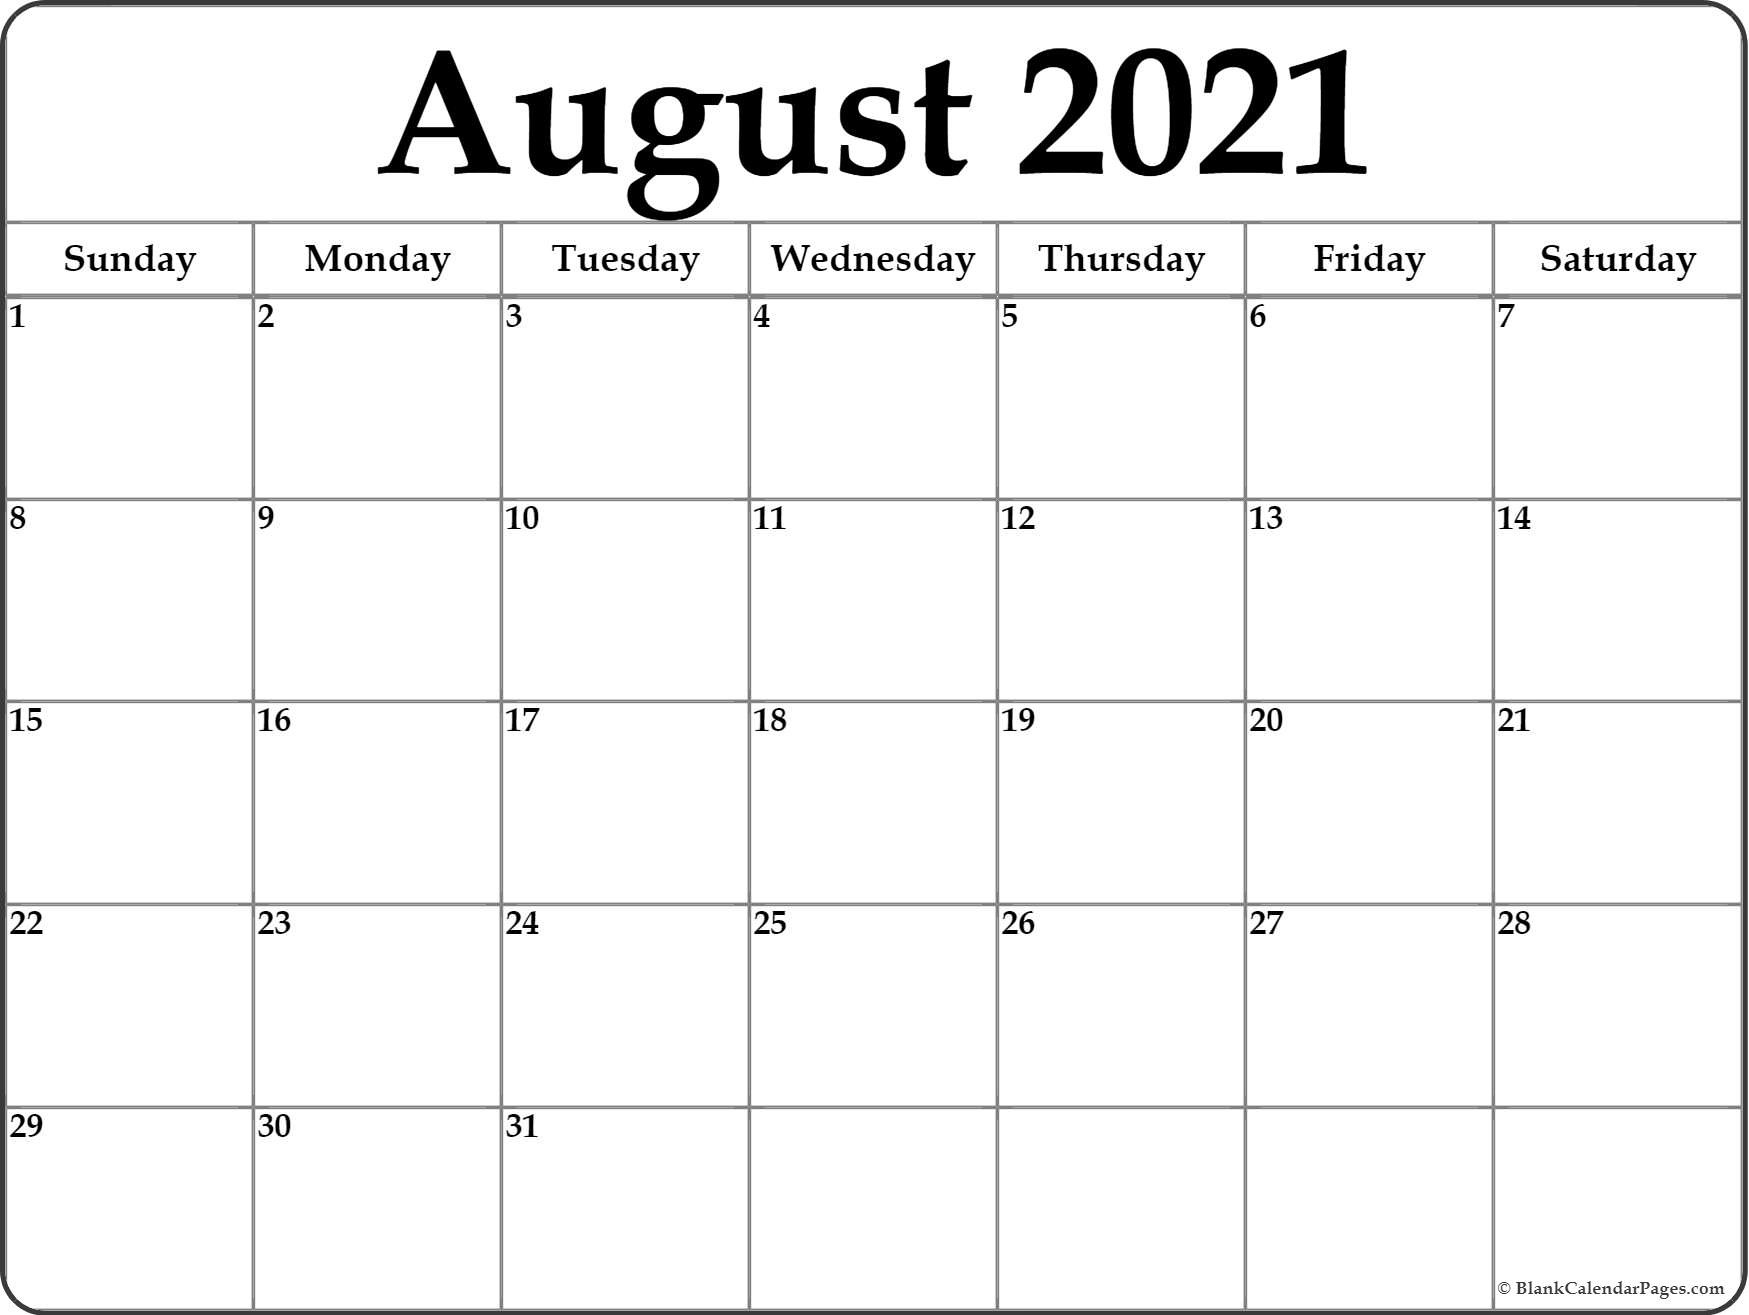 August 2021 Calendar | Free Printable Monthly Calendars-June July August 2021 Calendar Printable